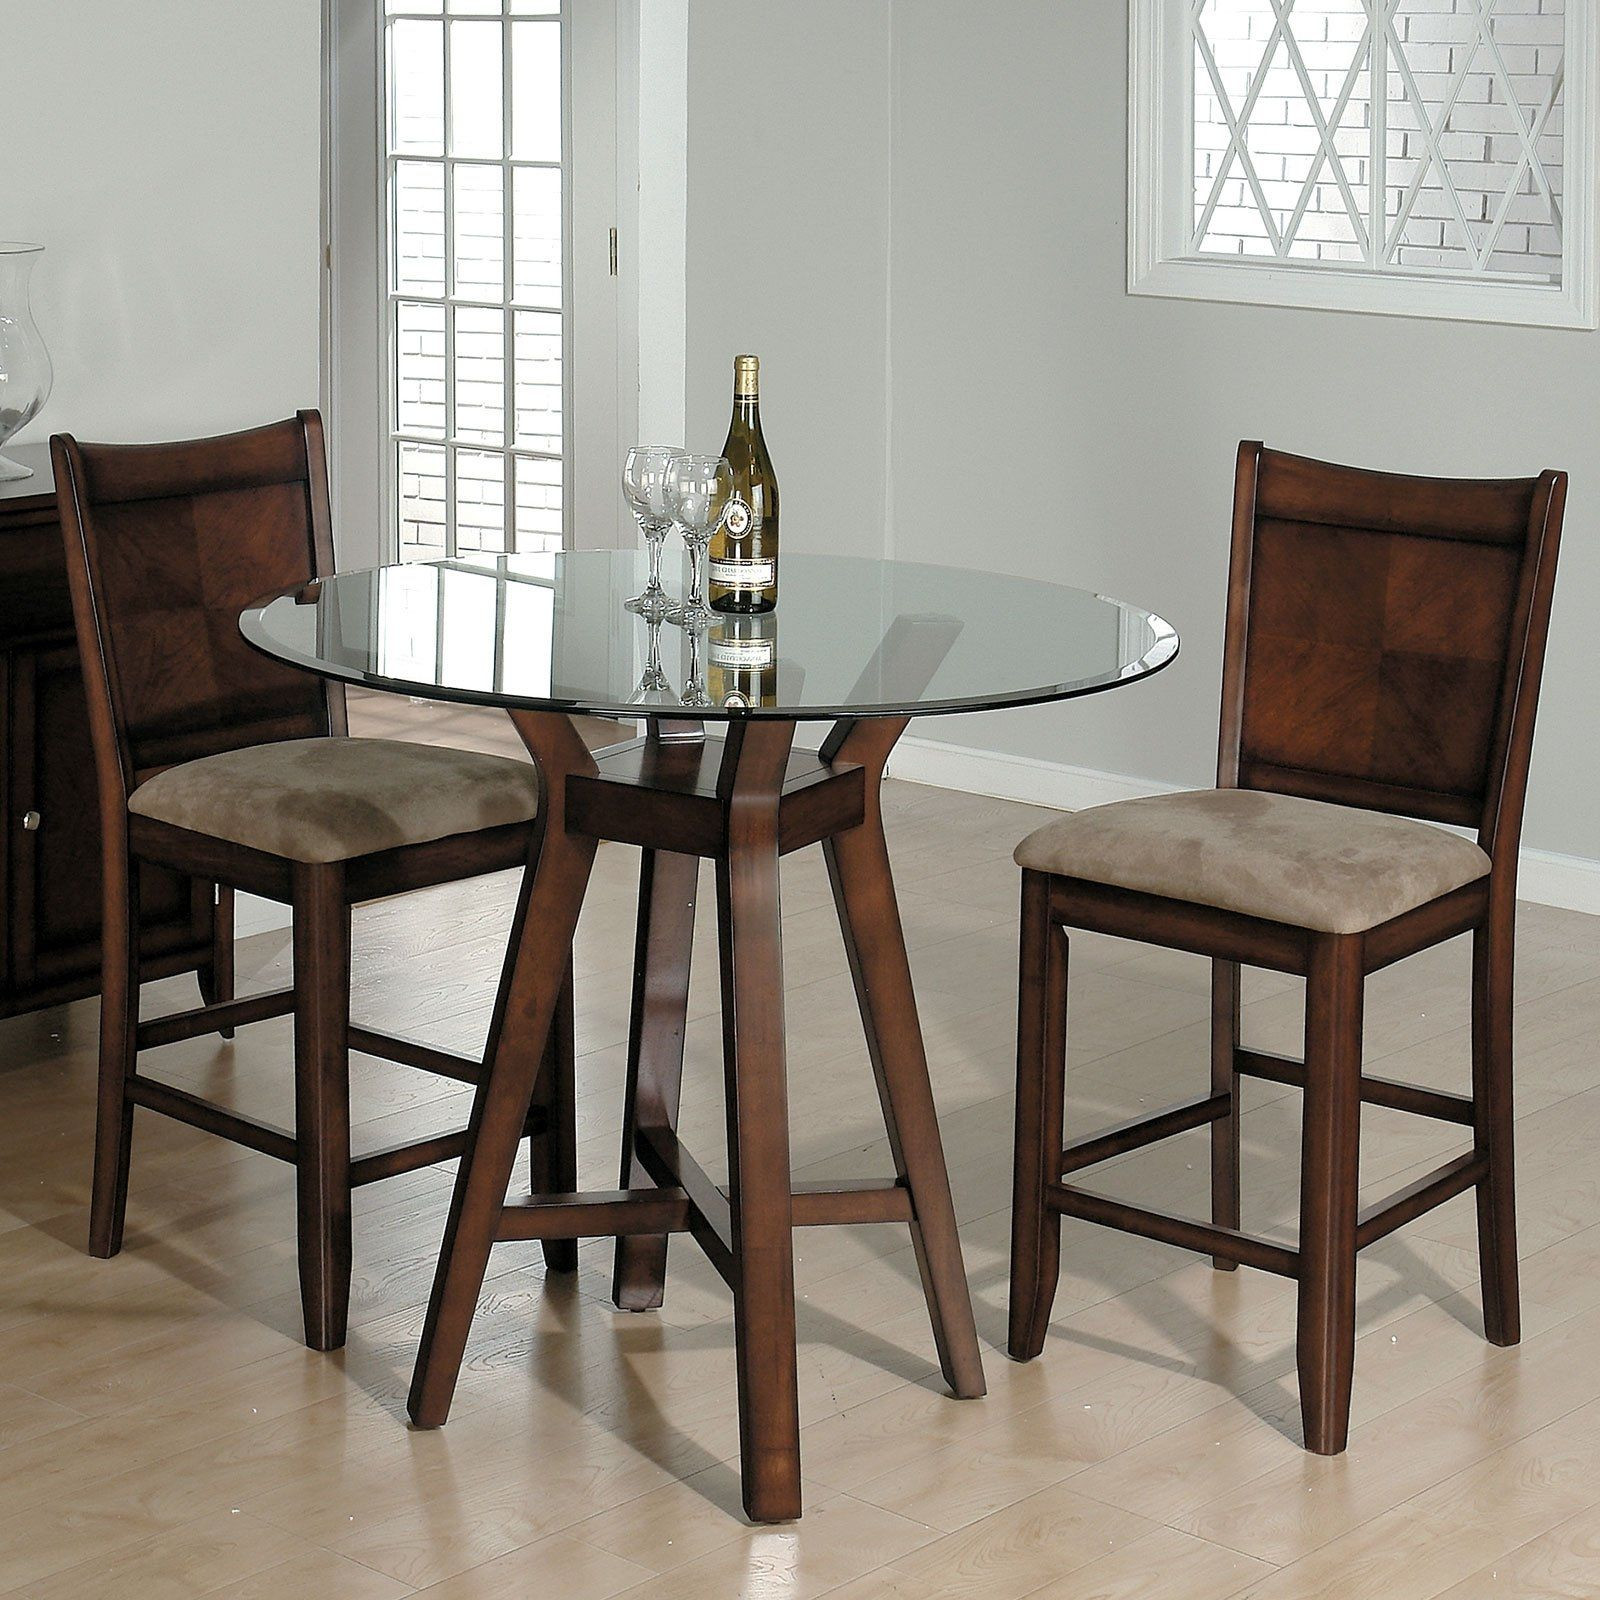 Small Bistro Tables For Kitchen
 Pub Style Kitchen Tables And Chairs